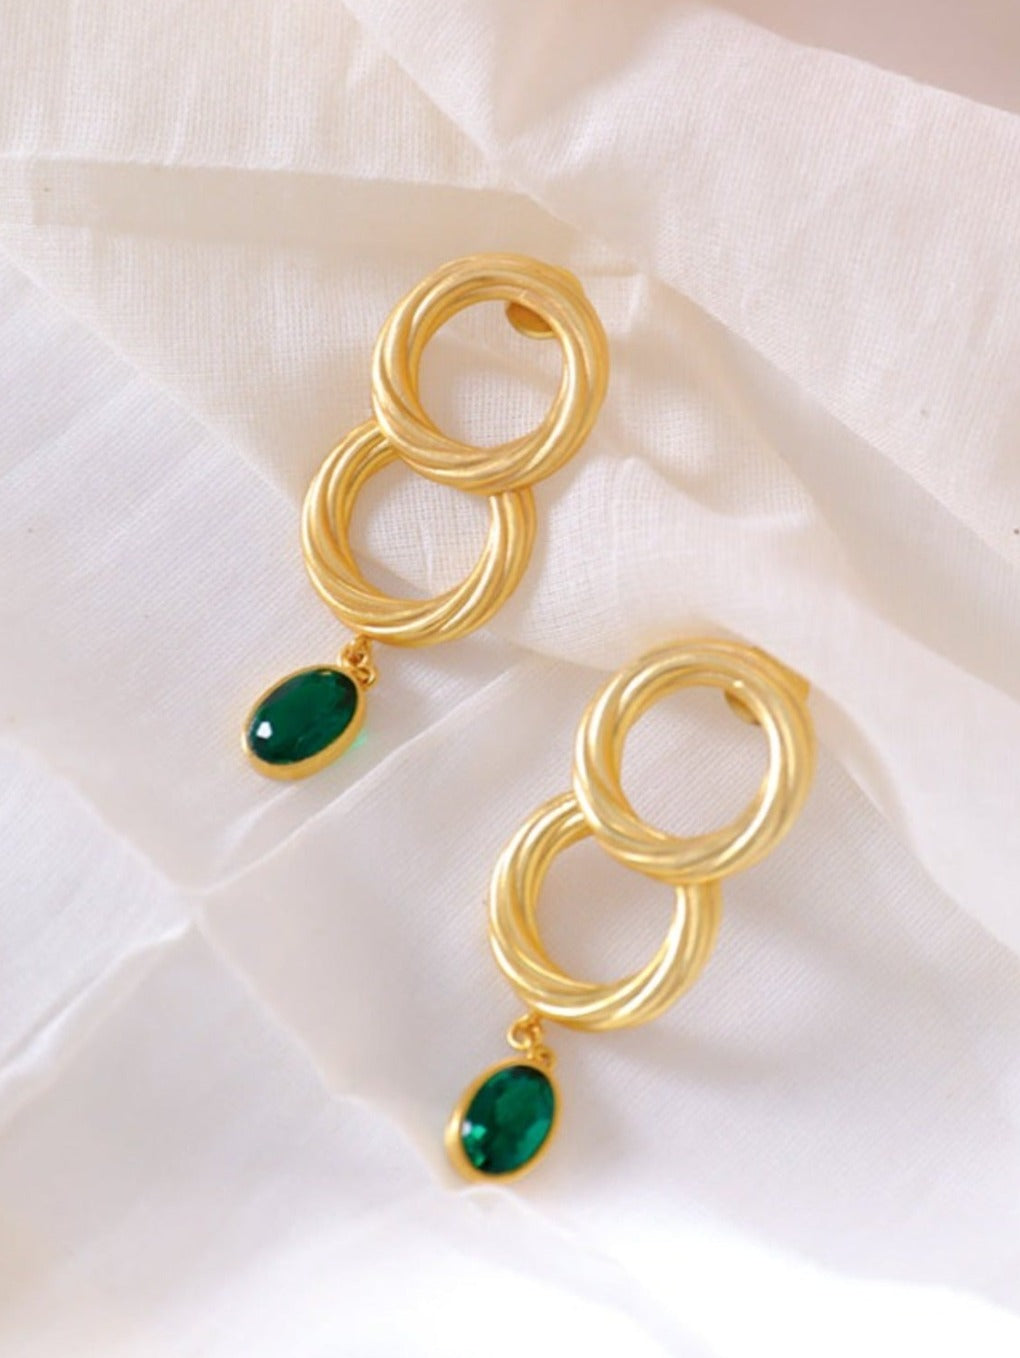 gold earrings with emerald drop